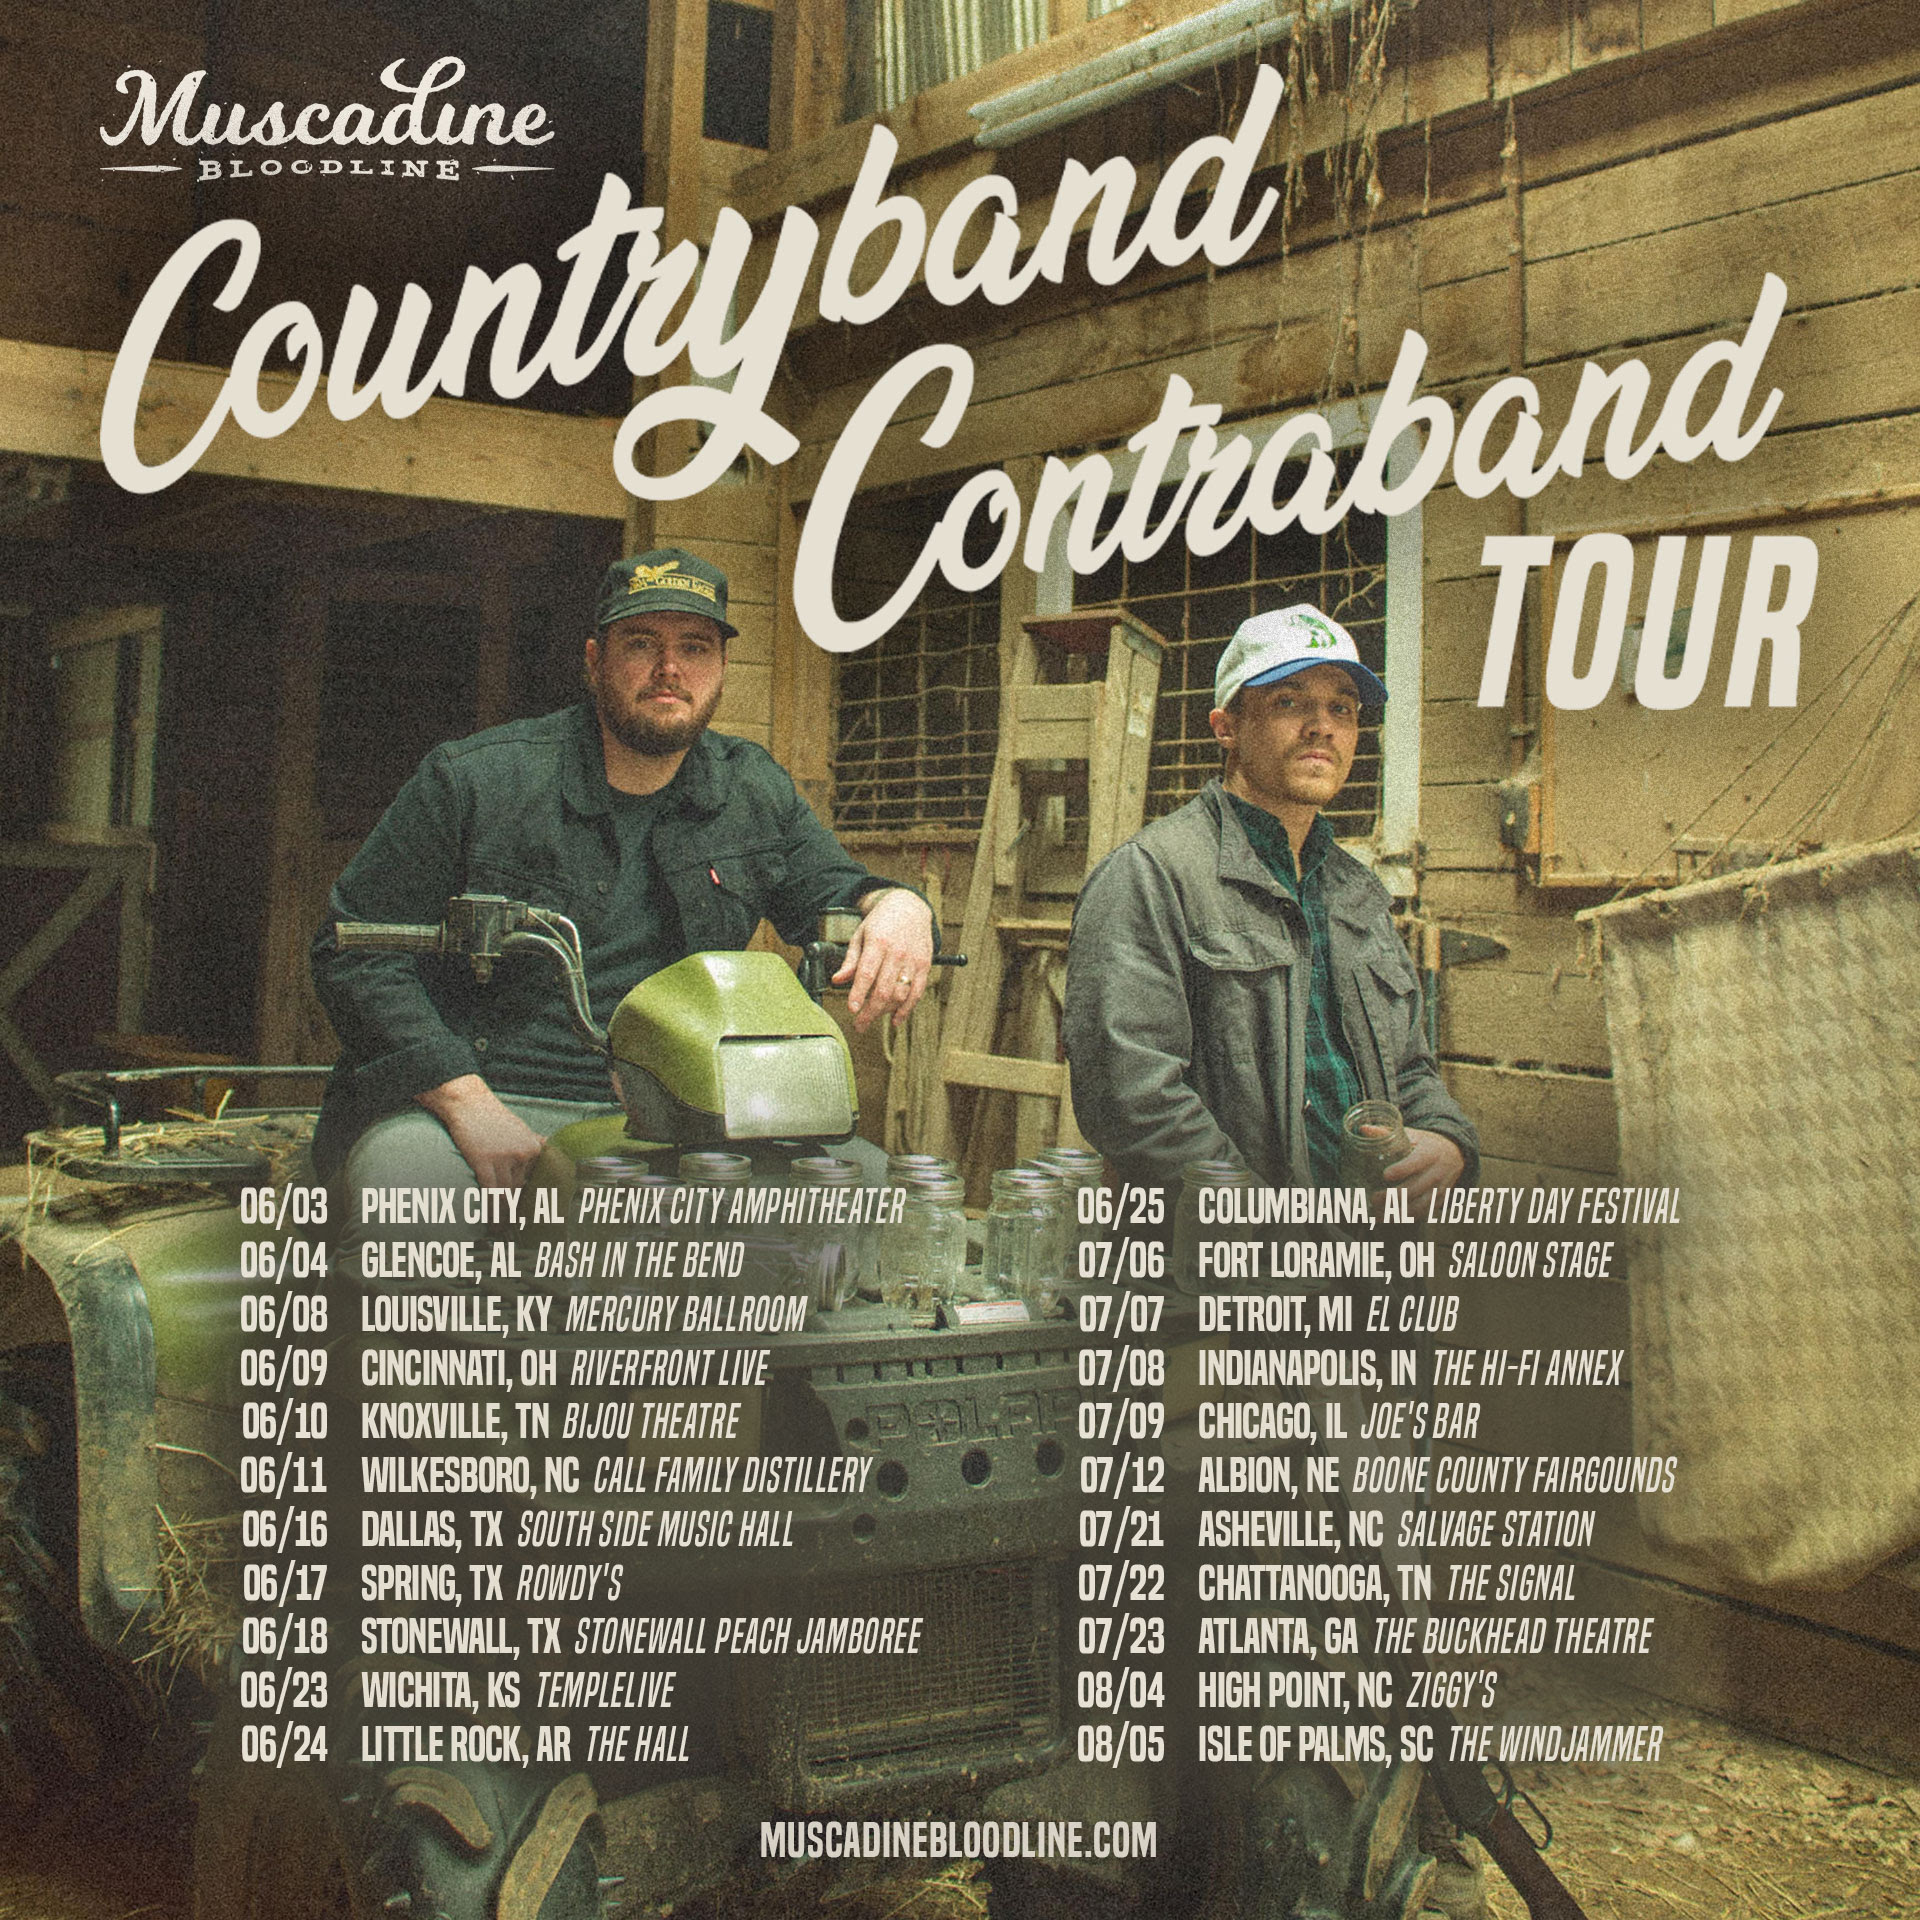 Muscadine Bloodline Announce Country Band Contraband Tour to Kick Off